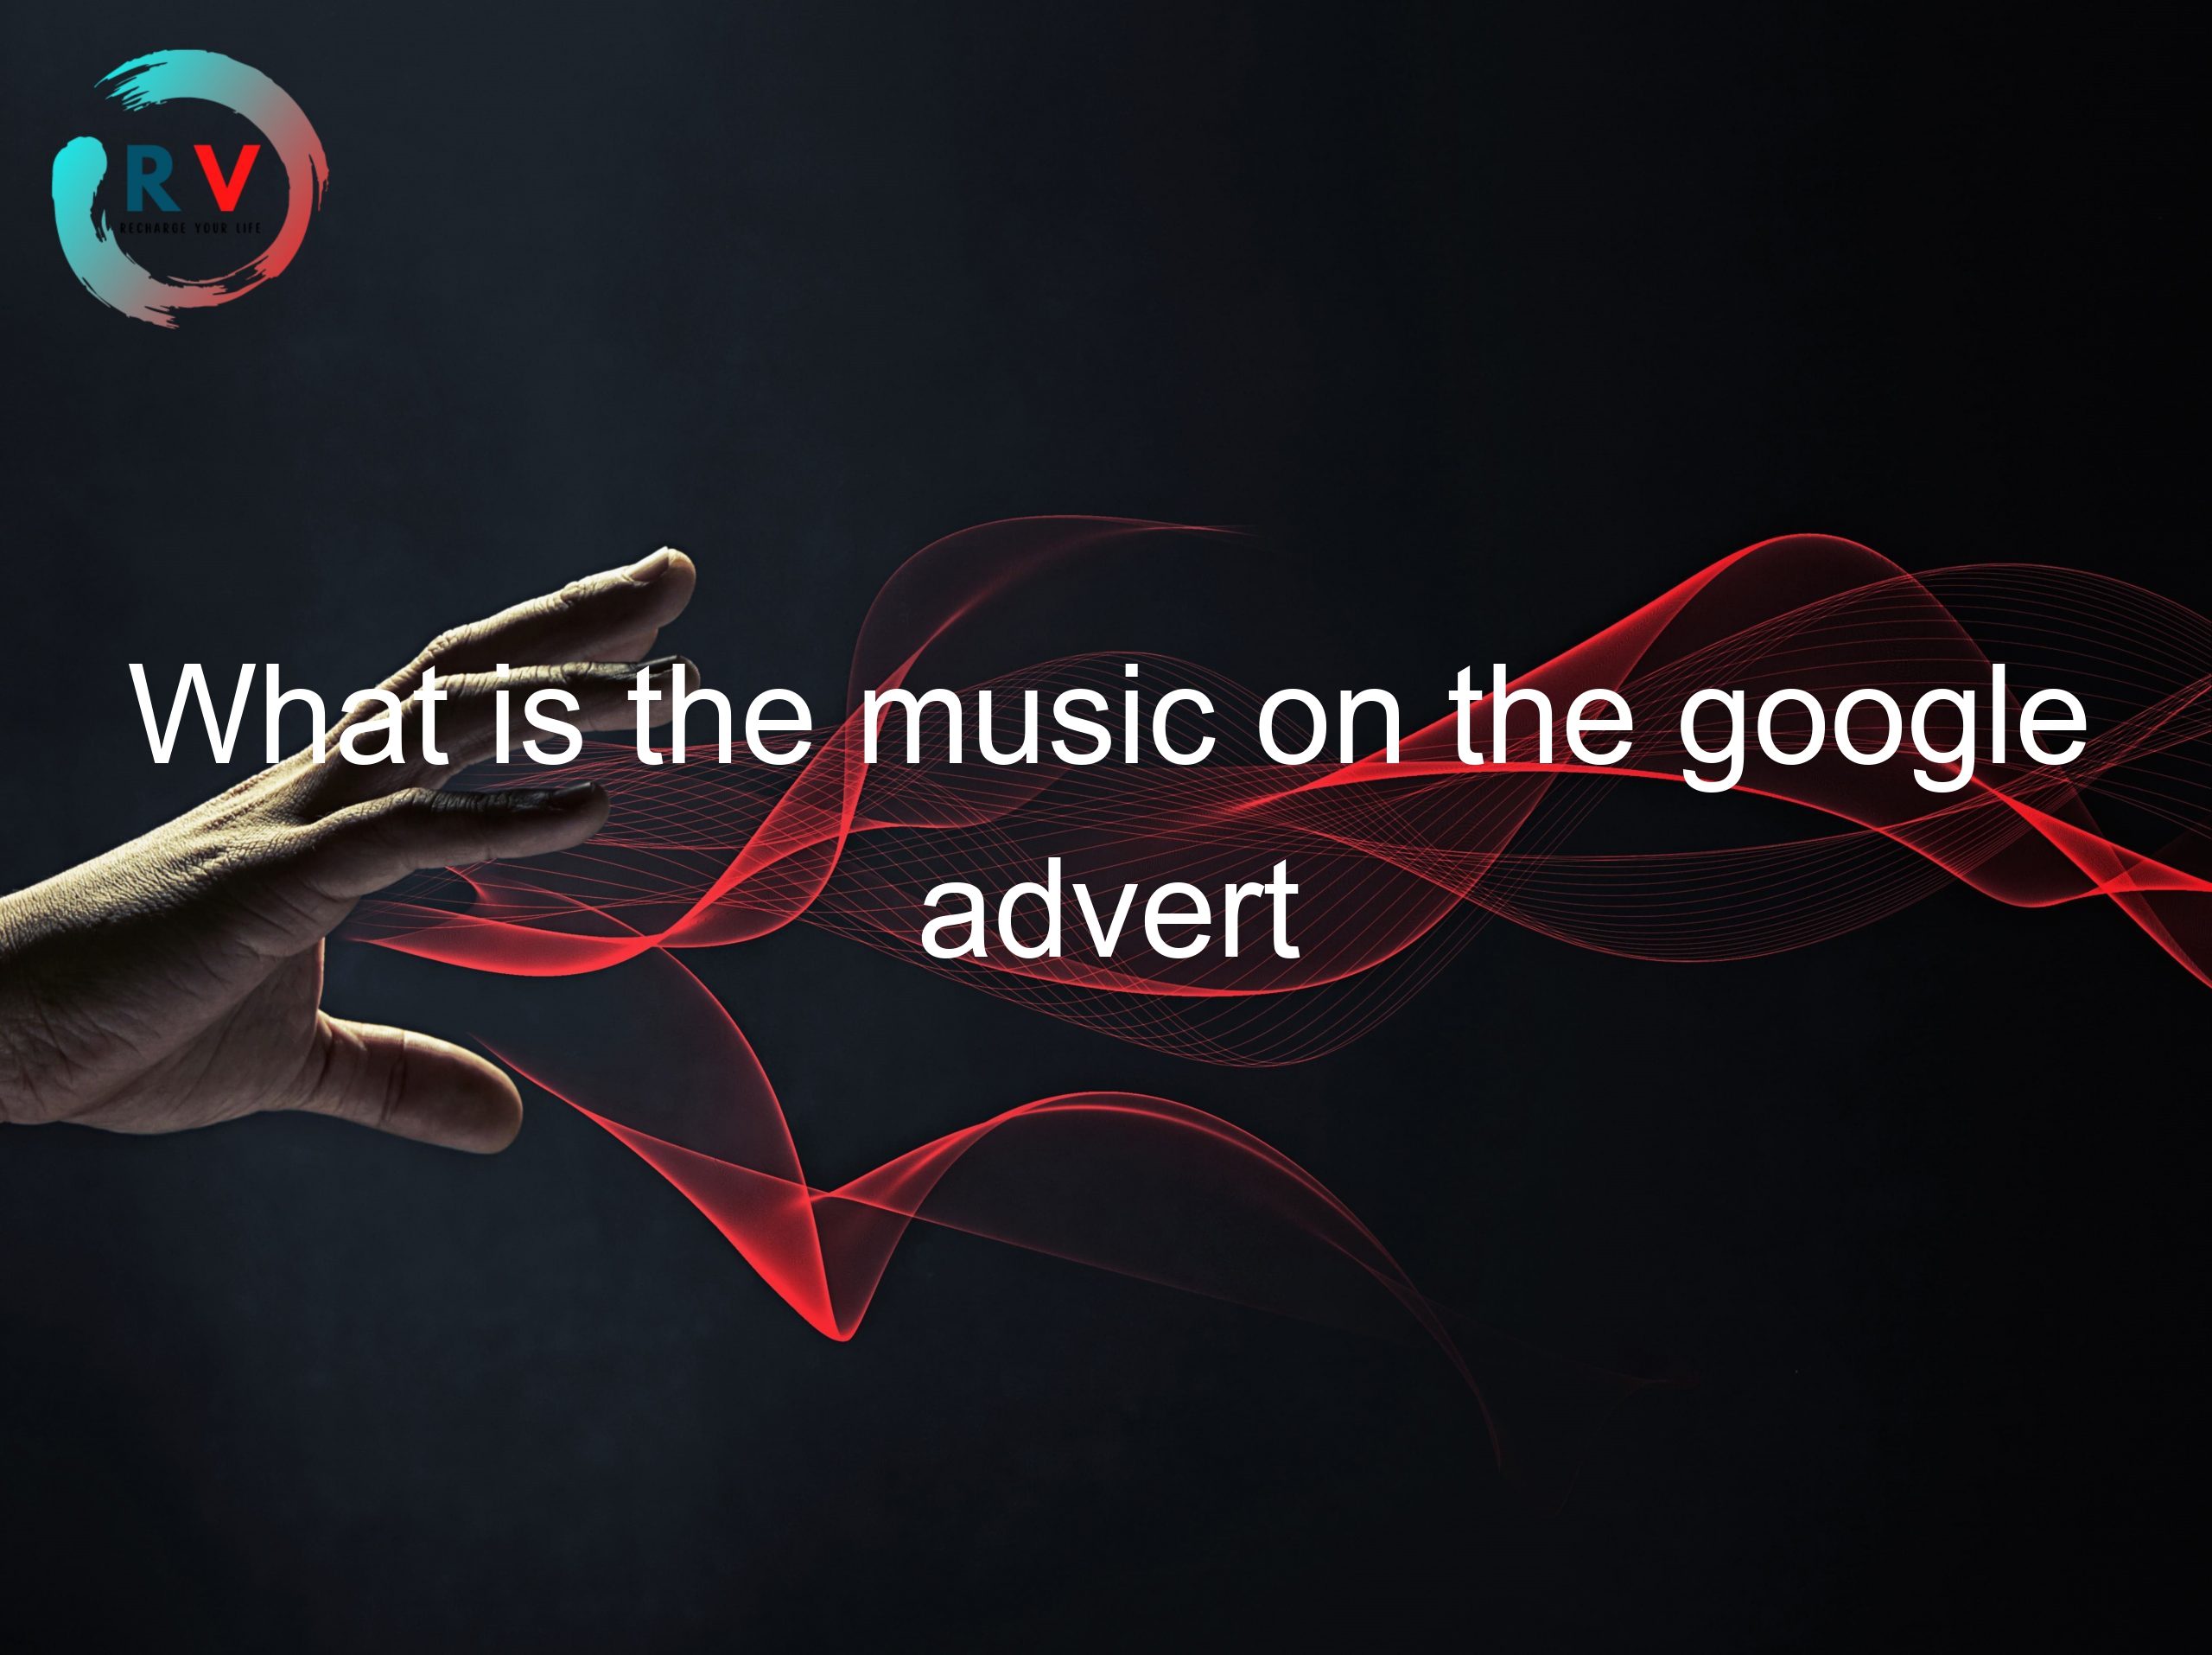 What is the music on the google advert